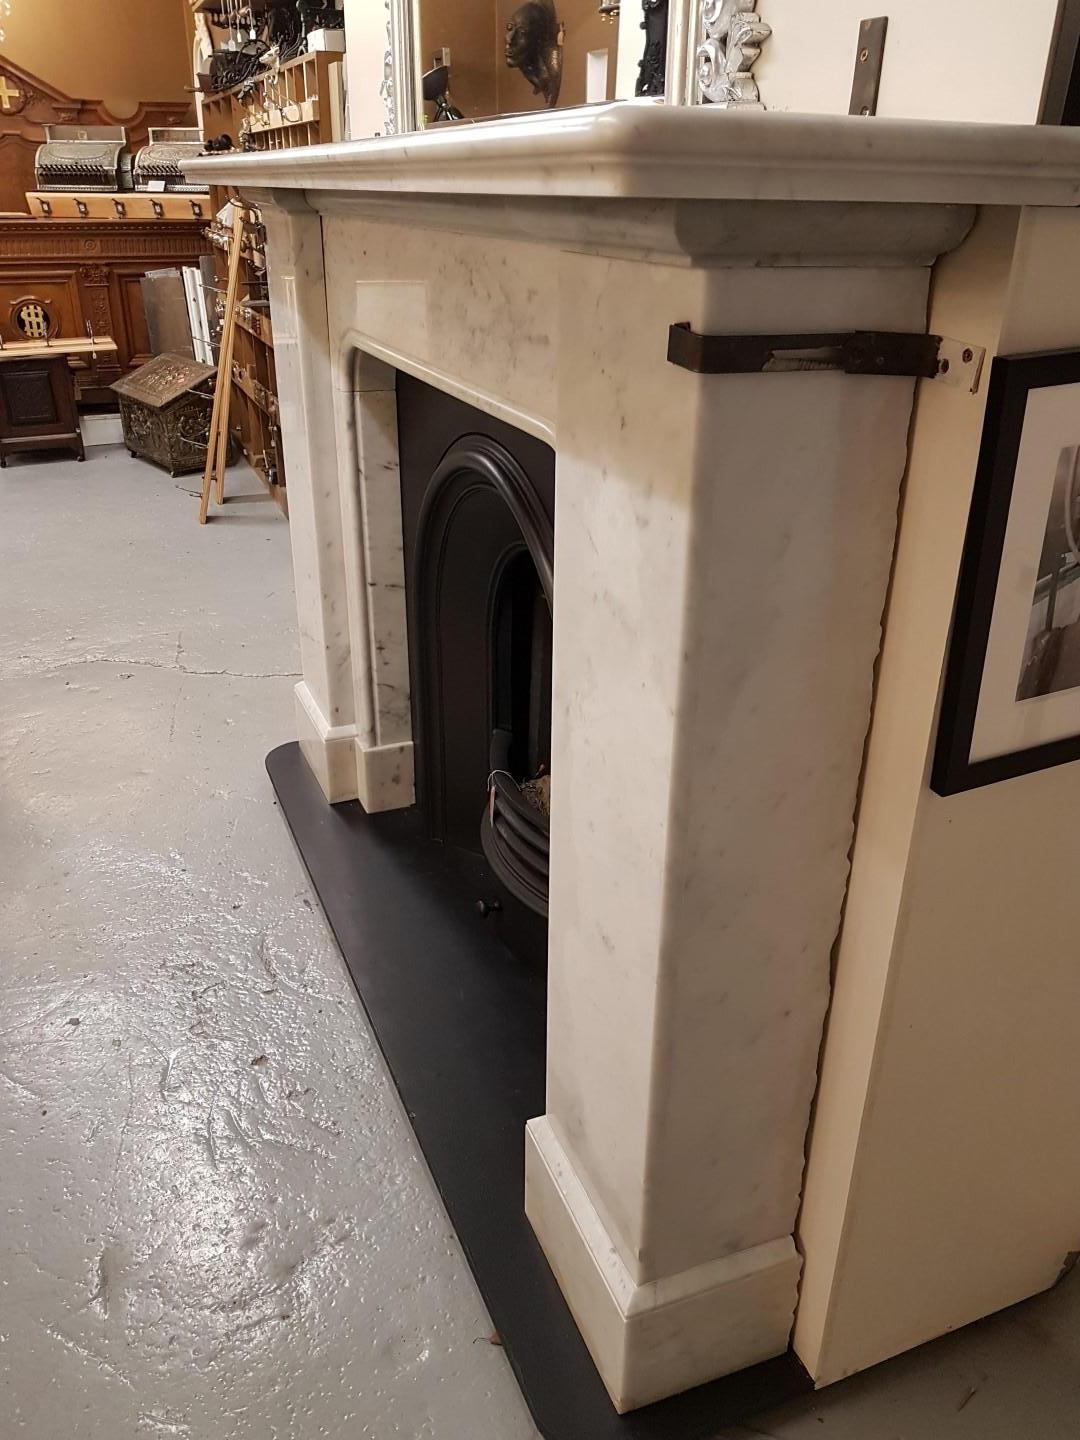 Fully restored and polished Carrara marble fireplace mantel

Insert shown for display purposes only, available separately

Mantel shelf: 76 3/4”

Mantel height: 48 1/2”

Opening width: 39 1/2”

Opening height: 37 1/4”.